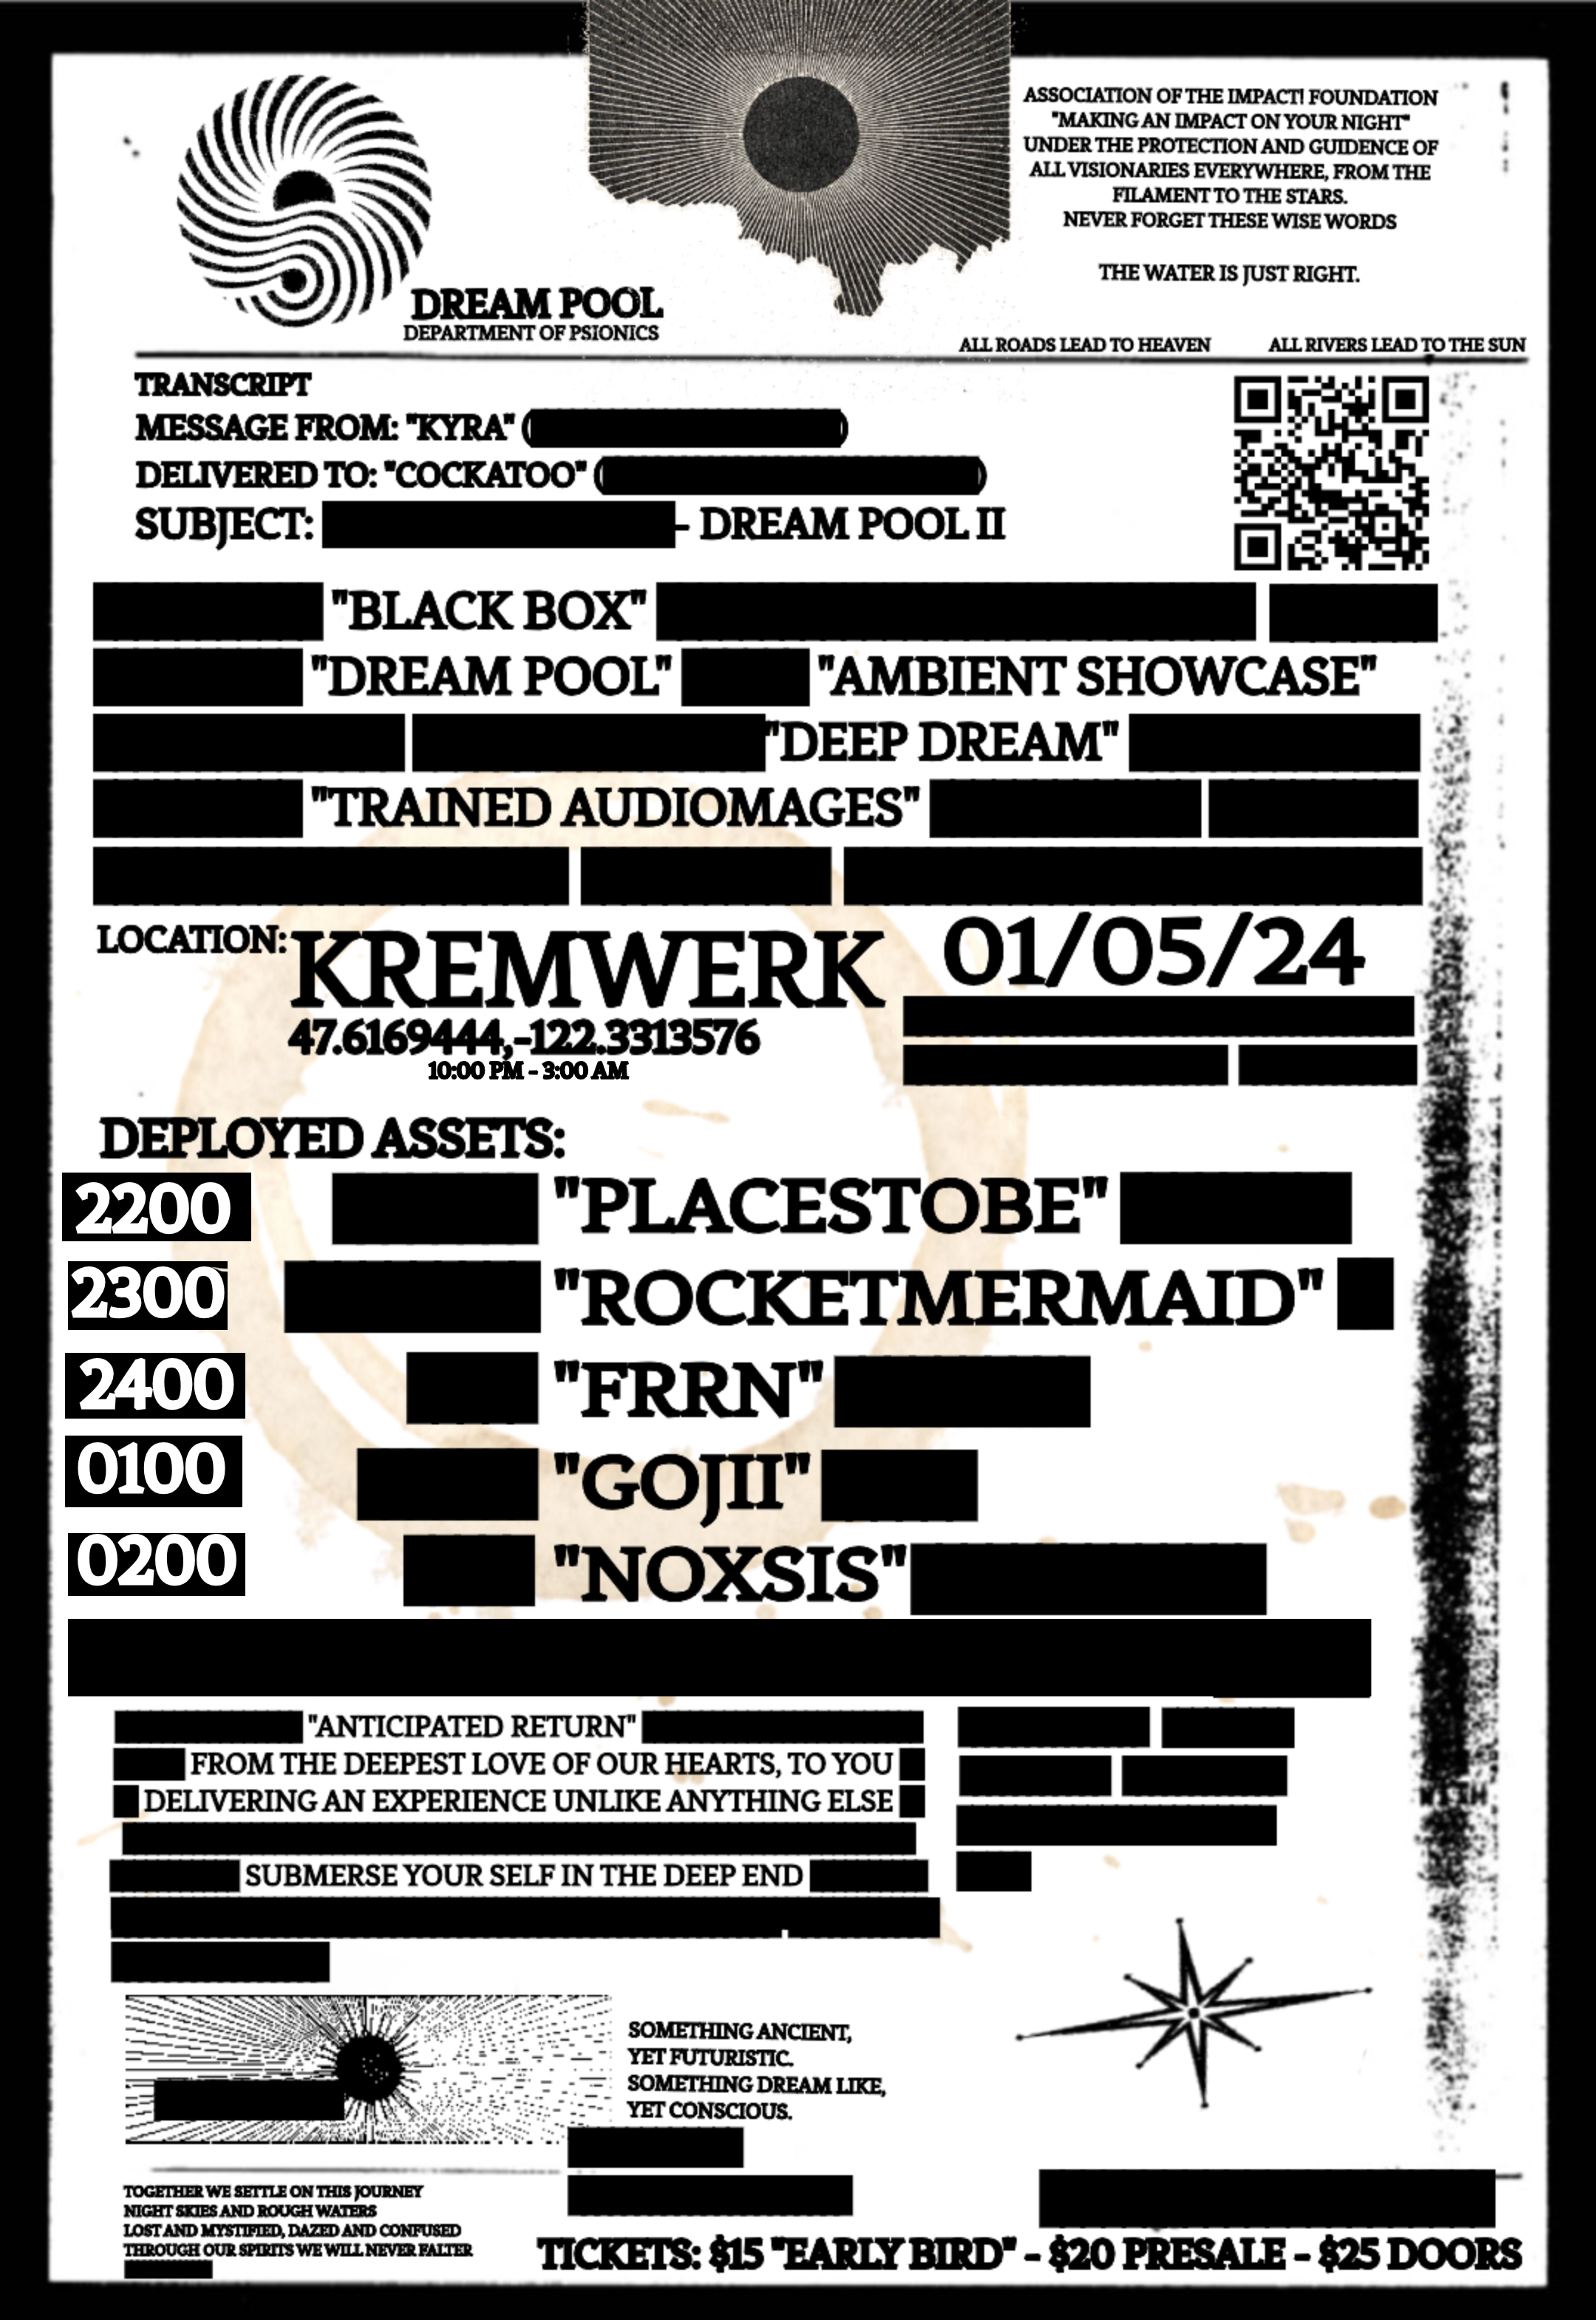 This is a poster for Dream Pool 2 held on January 5th at Kremwerk from 10pm to 3am